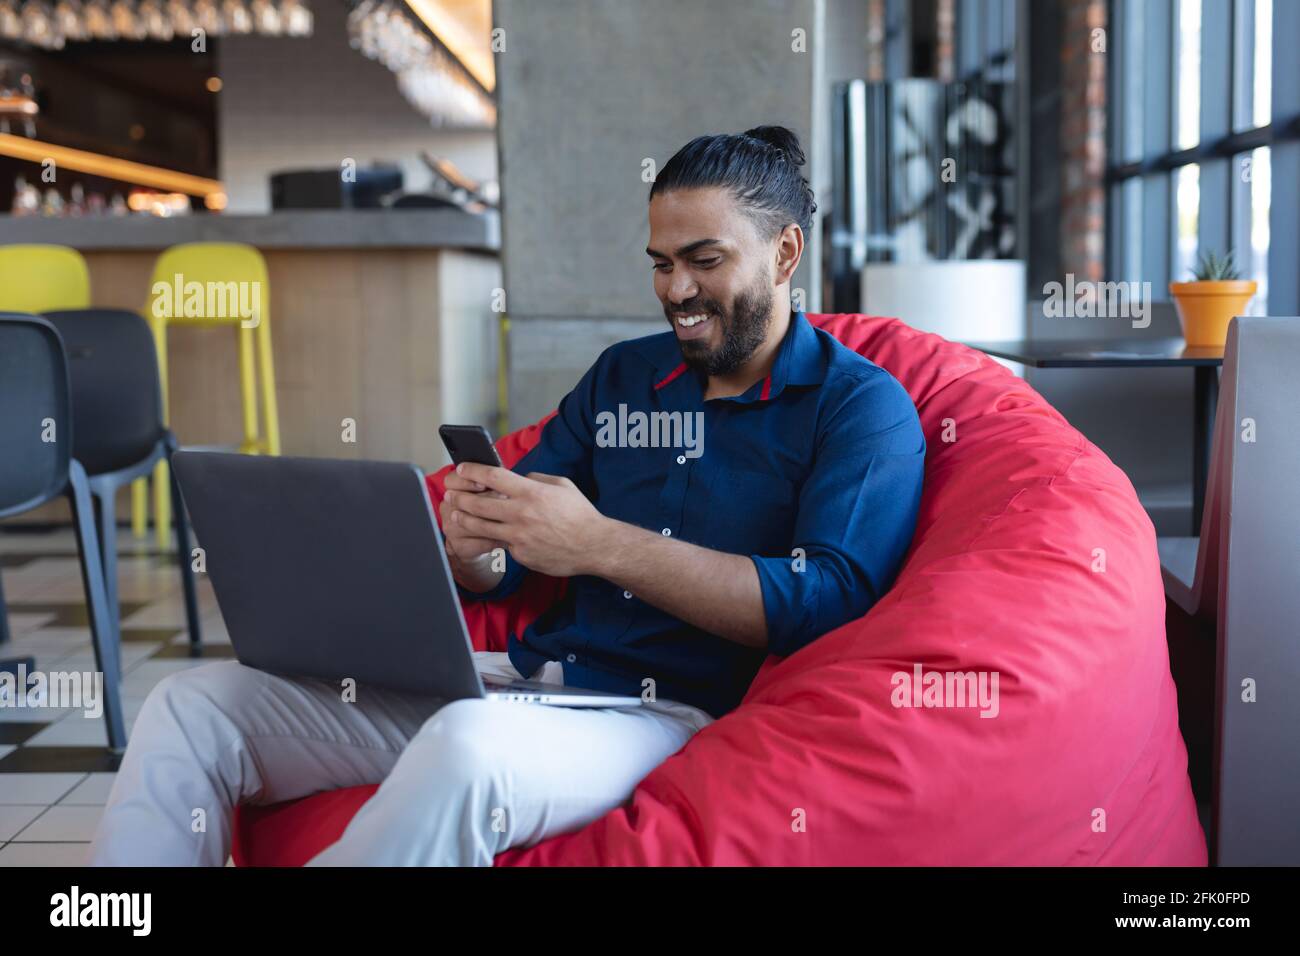 Smiling mixed race man sitting, using smartphone and laptop in cafe Stock Photo